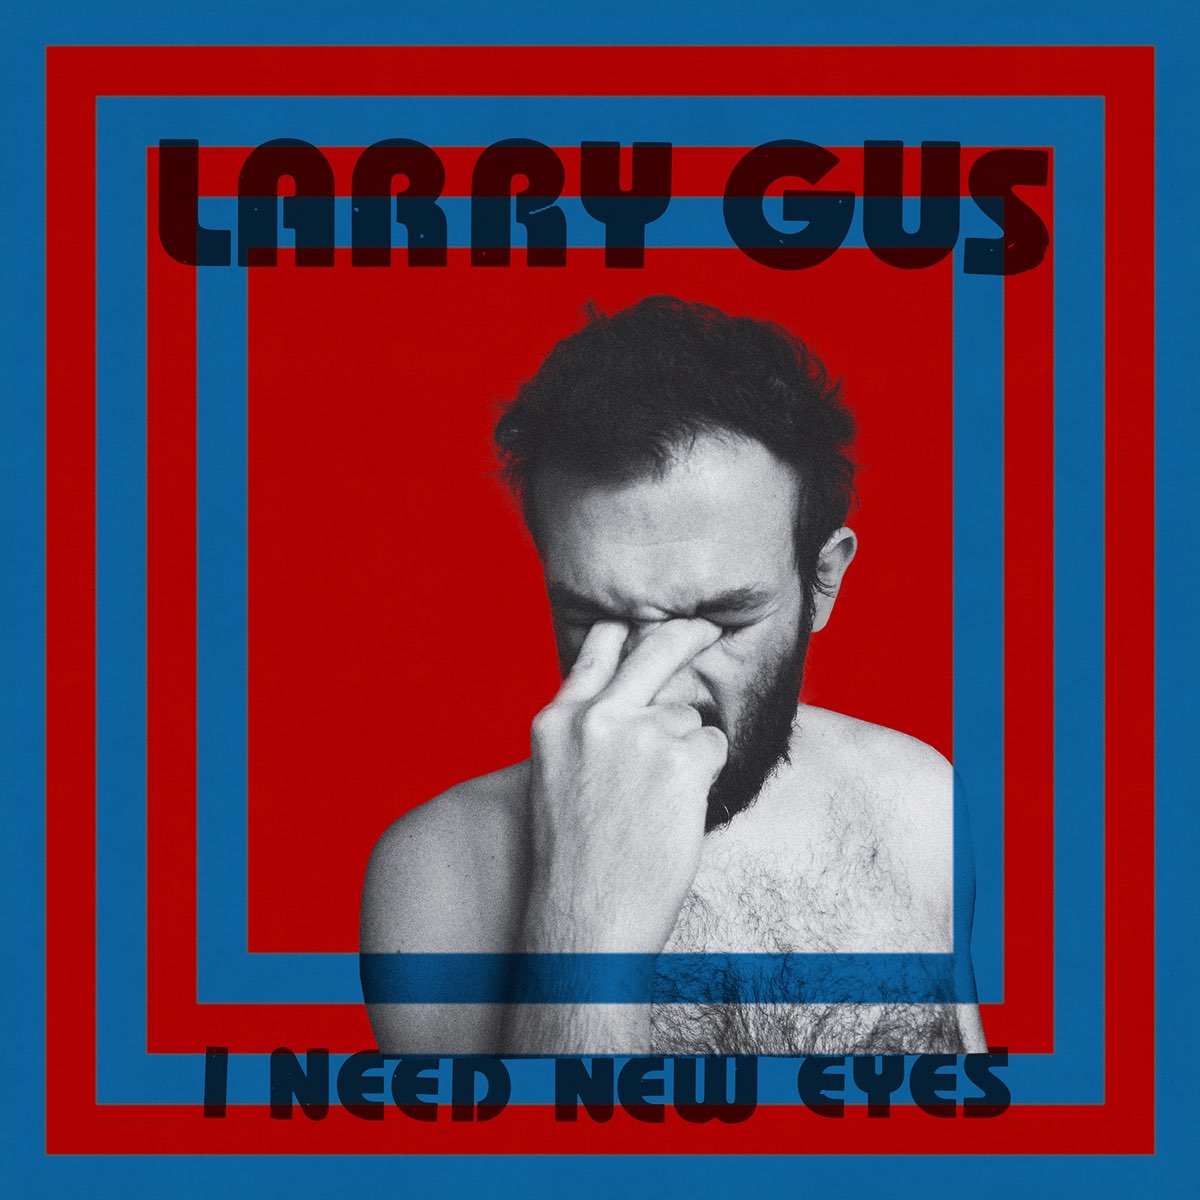 Larry Gus – Need New Eyes